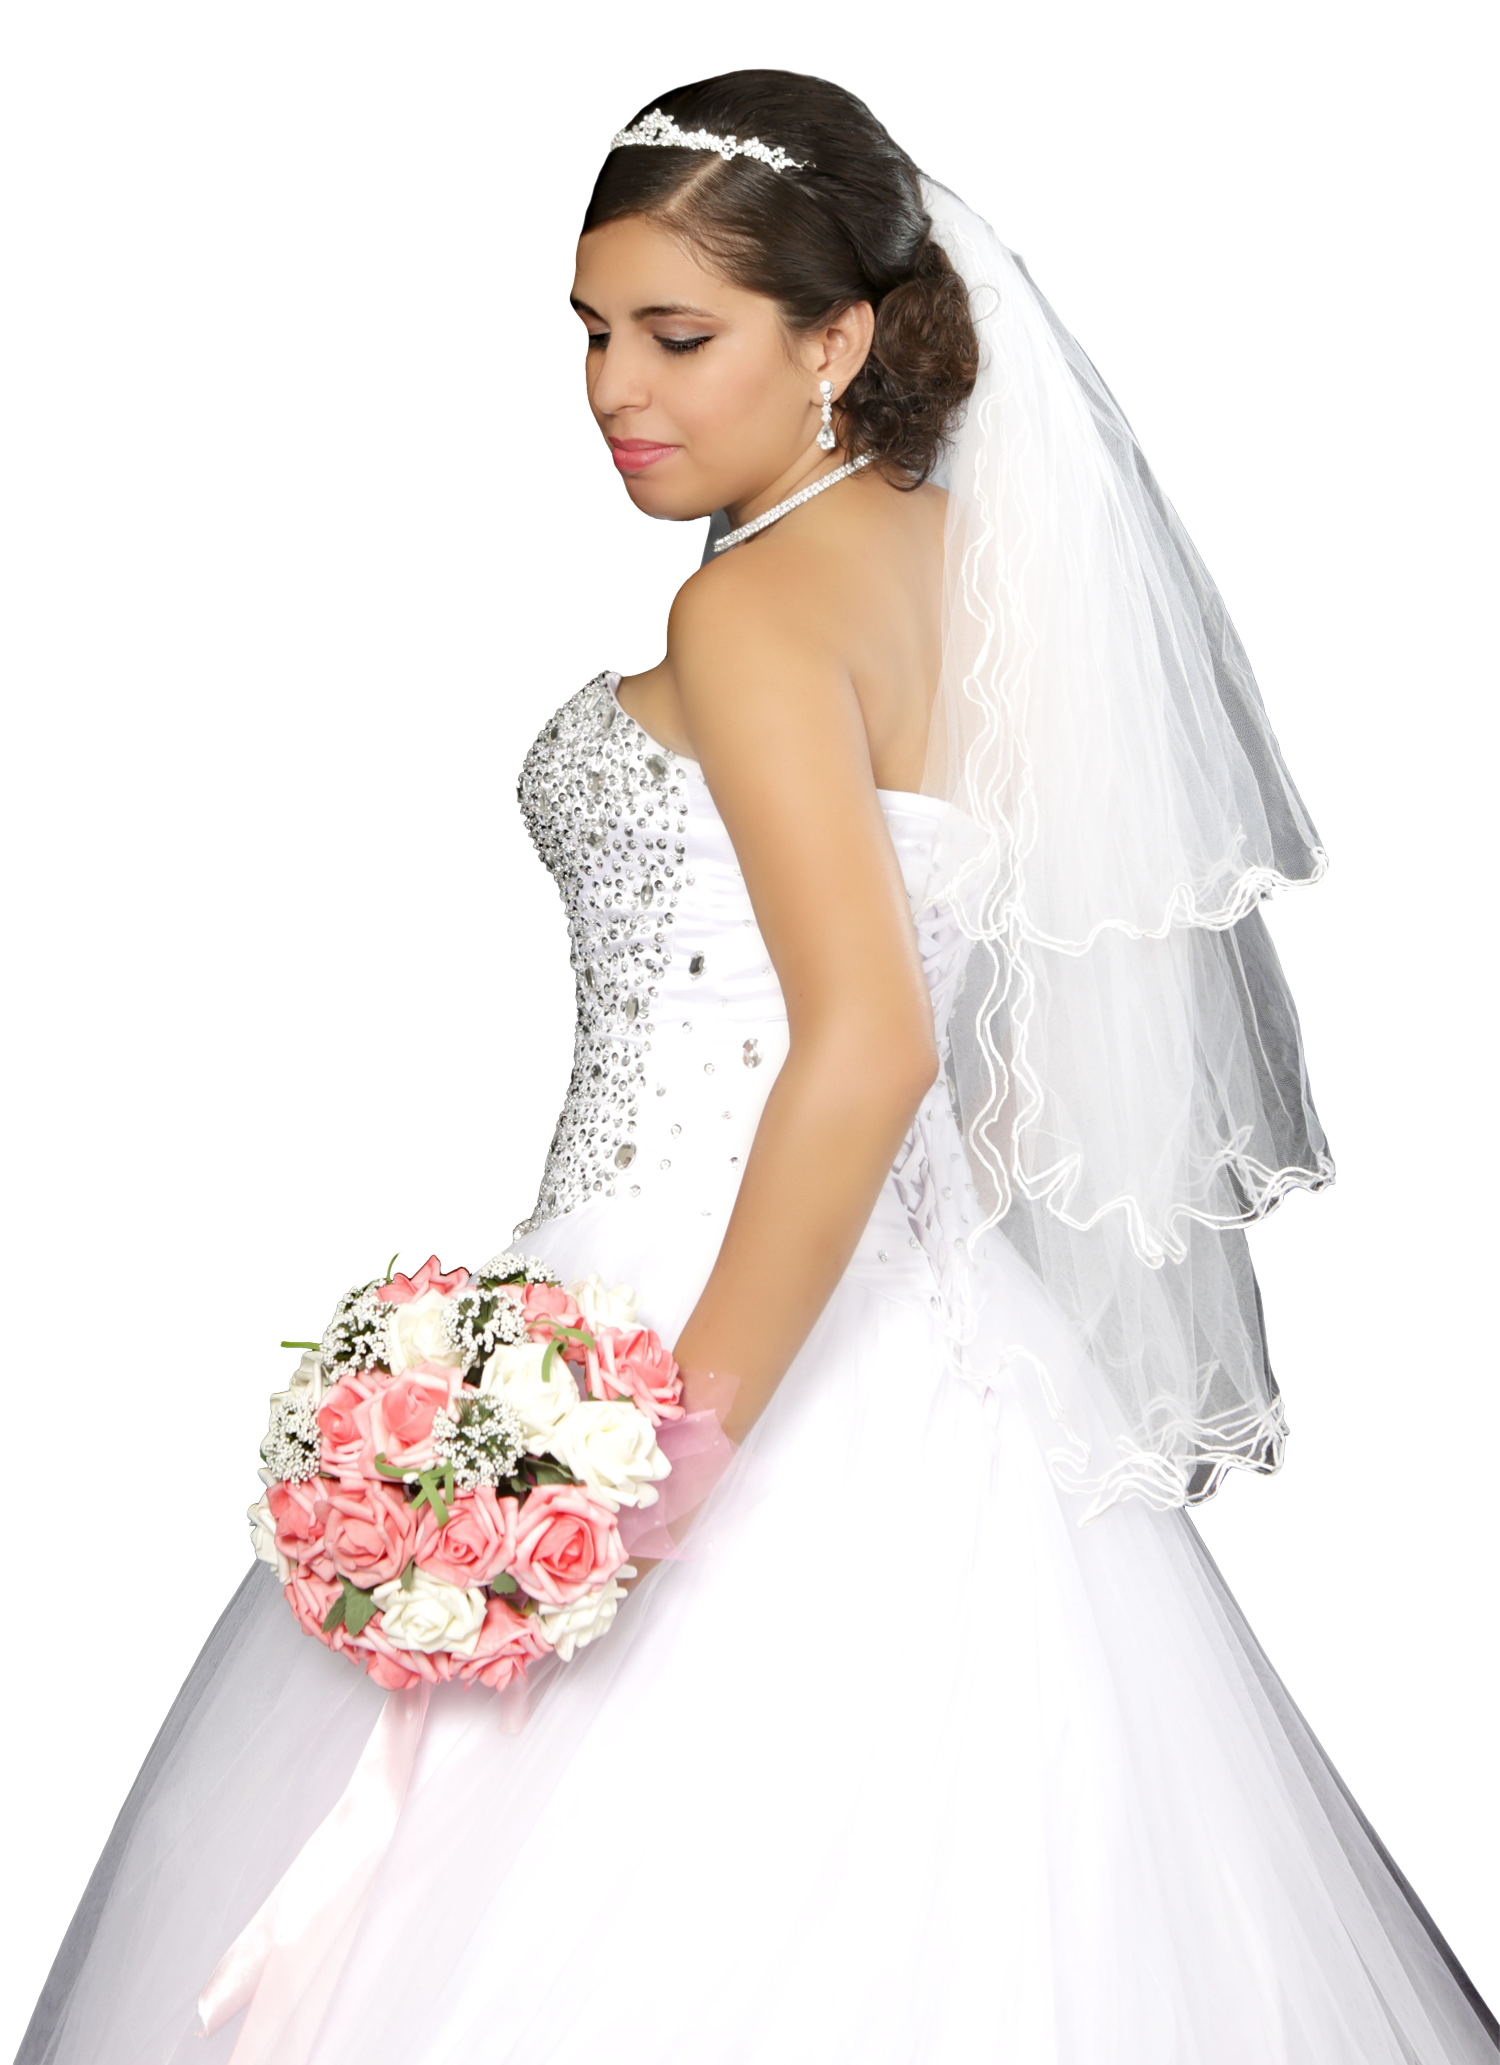 Wedding Girl Png Transparent Image - Grill, Transparent background PNG HD thumbnail